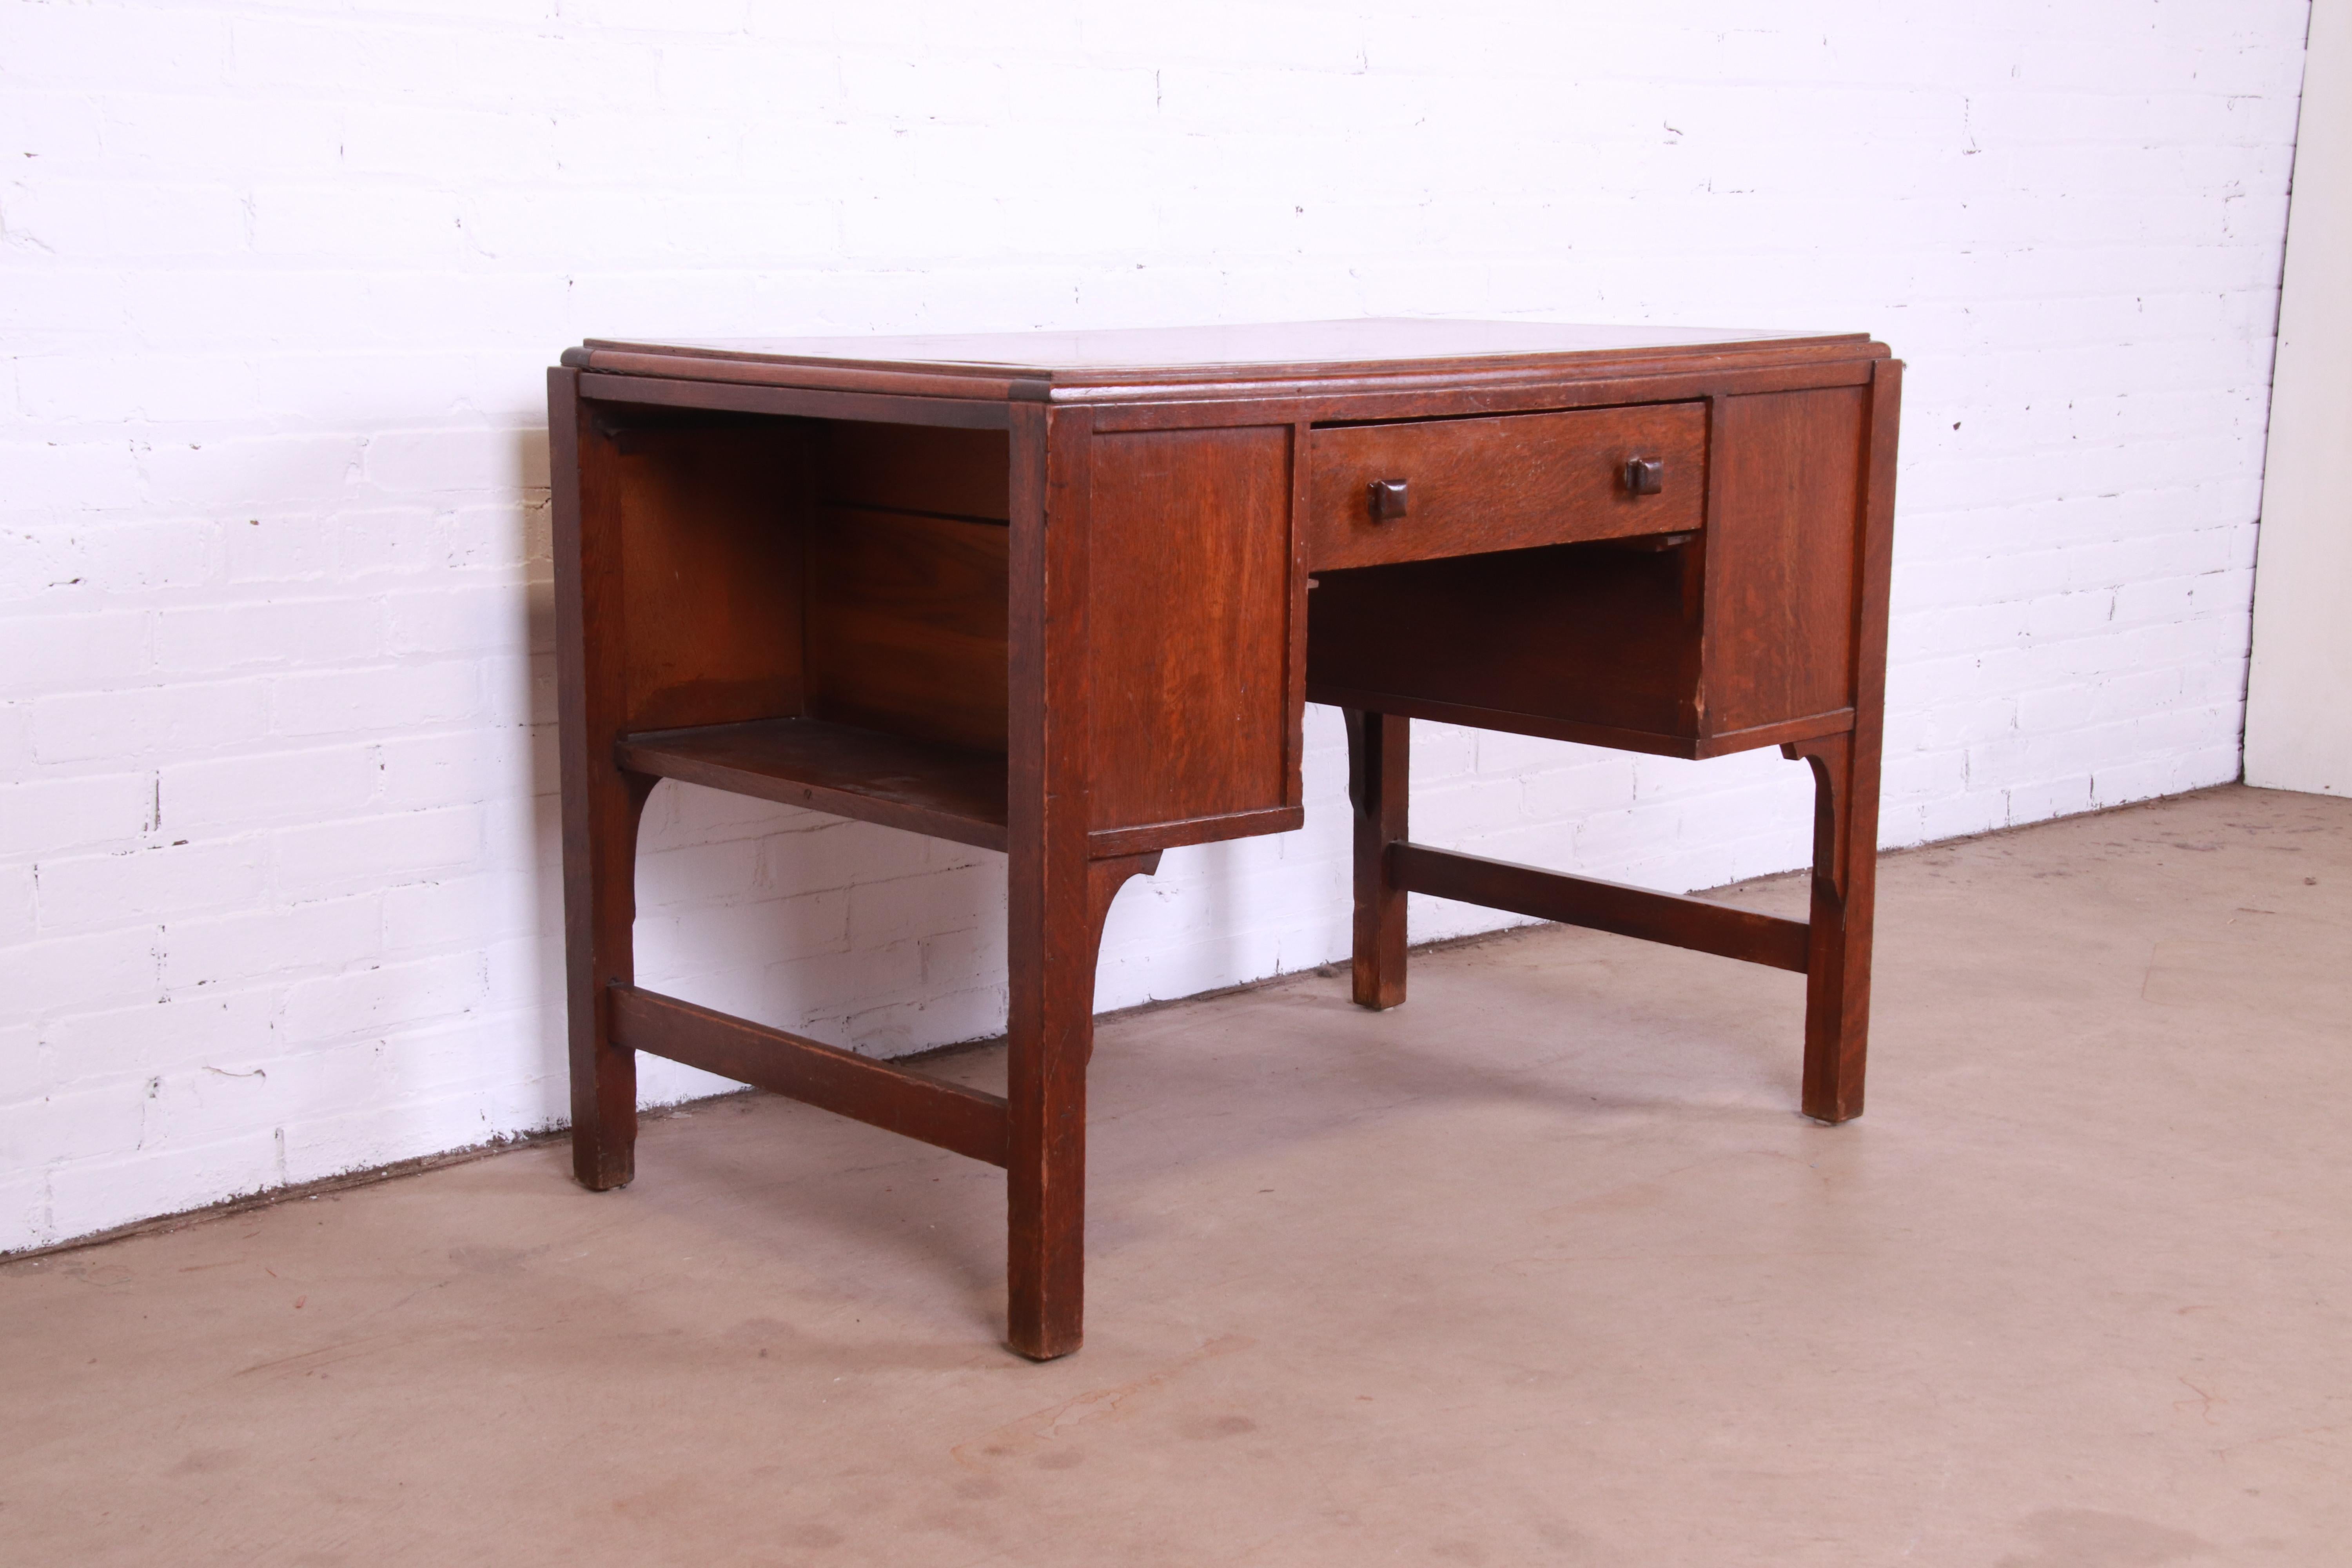 20th Century Antique Arts & Crafts Oak Writing Desk From Frank Lloyd Wright's DeRhodes House For Sale